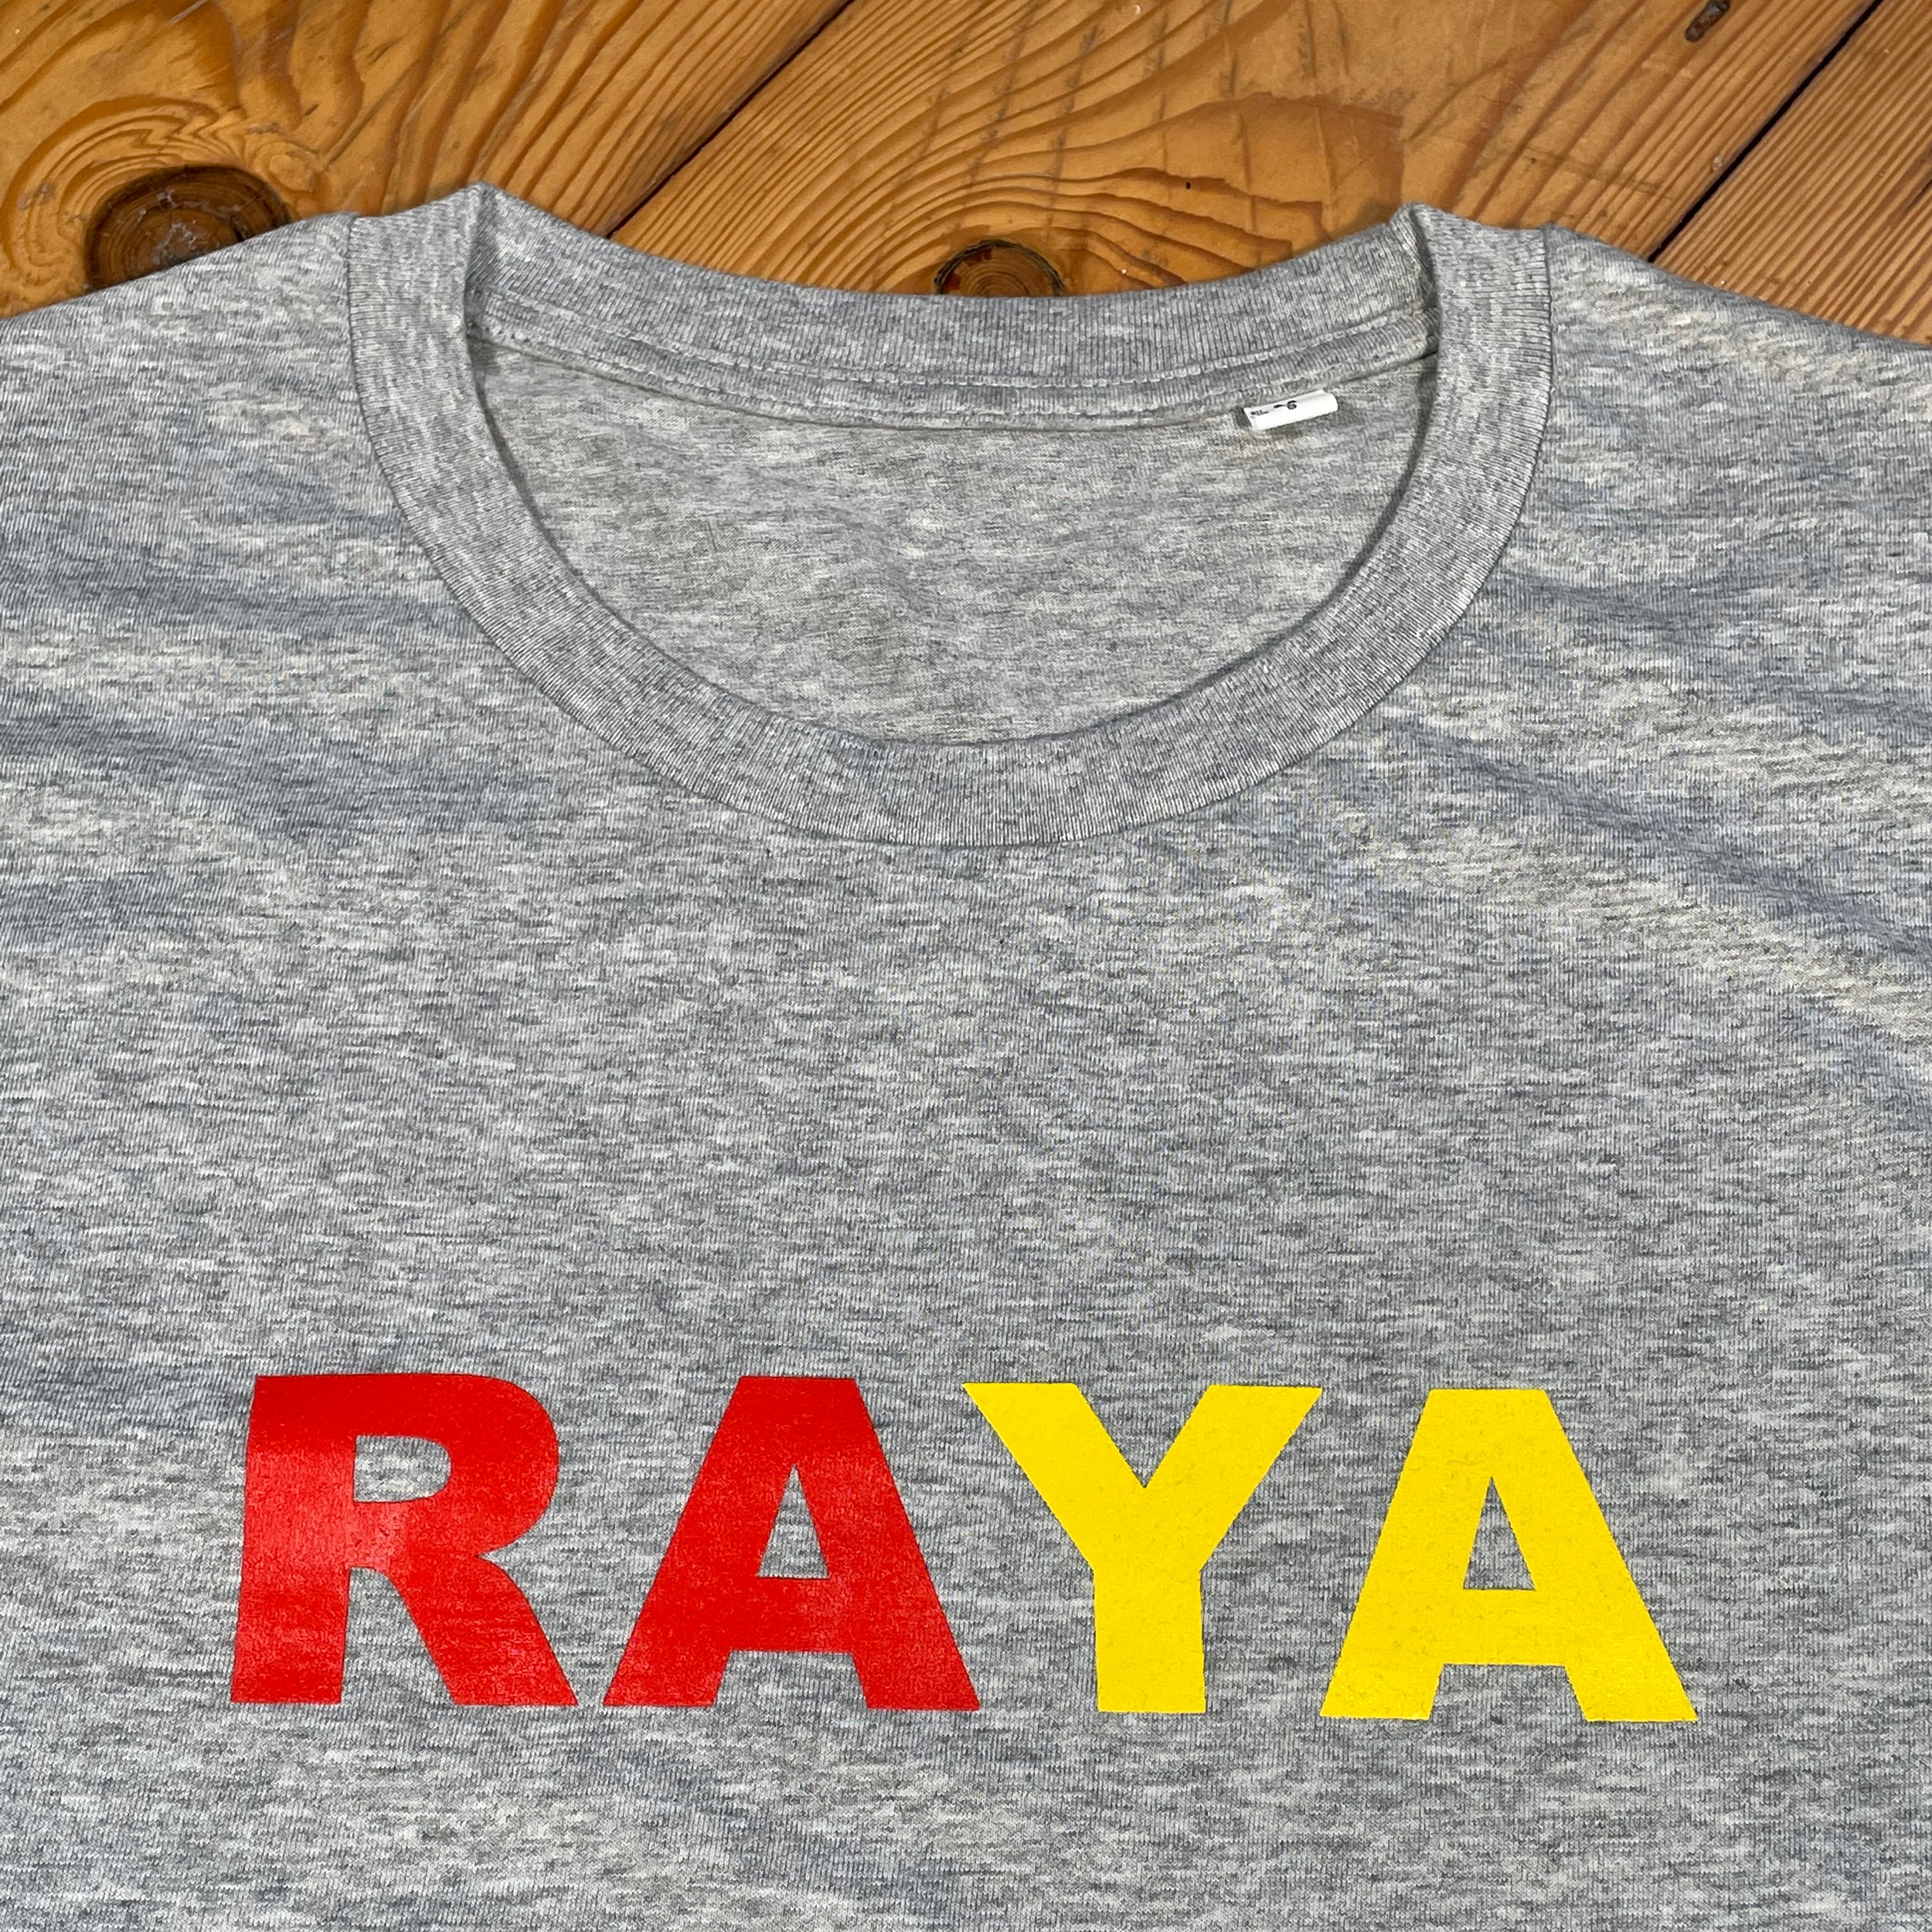 RAYA the first design of the Partick Thistle fan brand